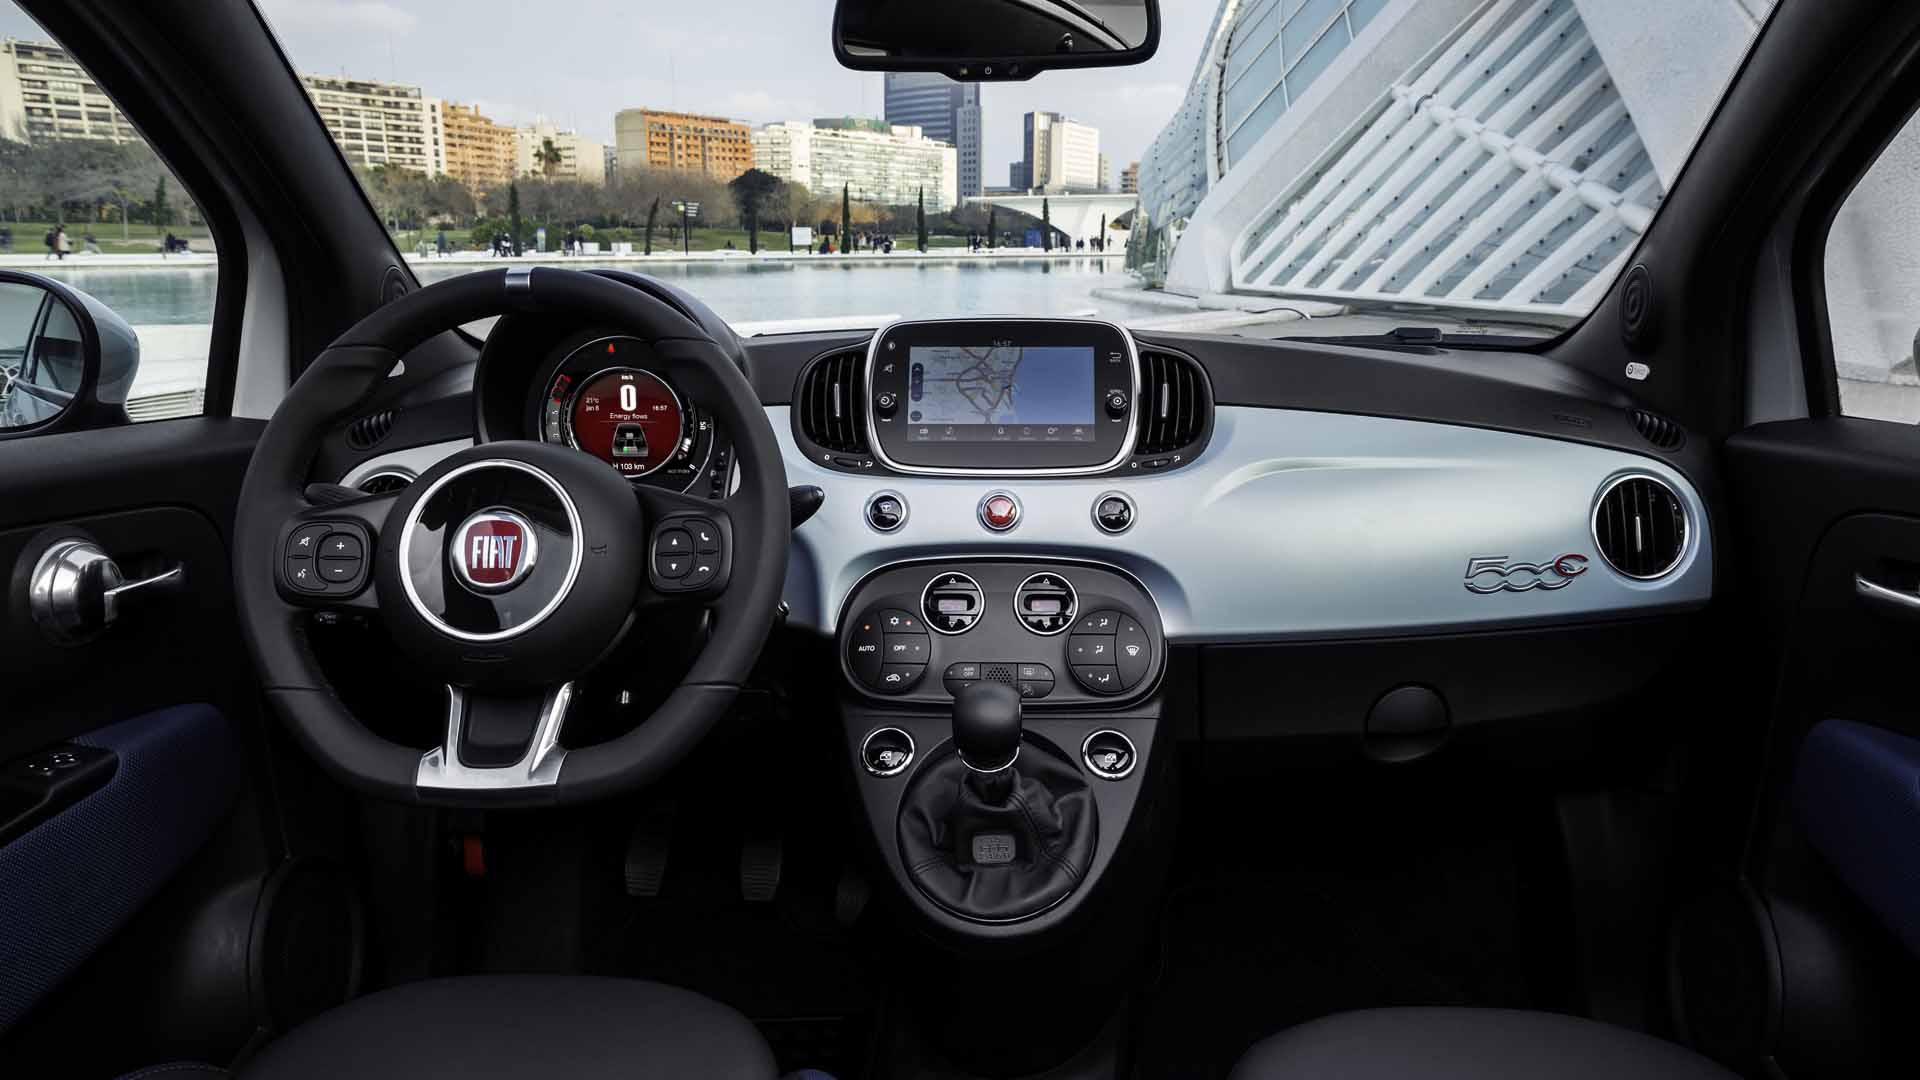 Fiat 500 Review & Prices 2022 | AutoTrader UK